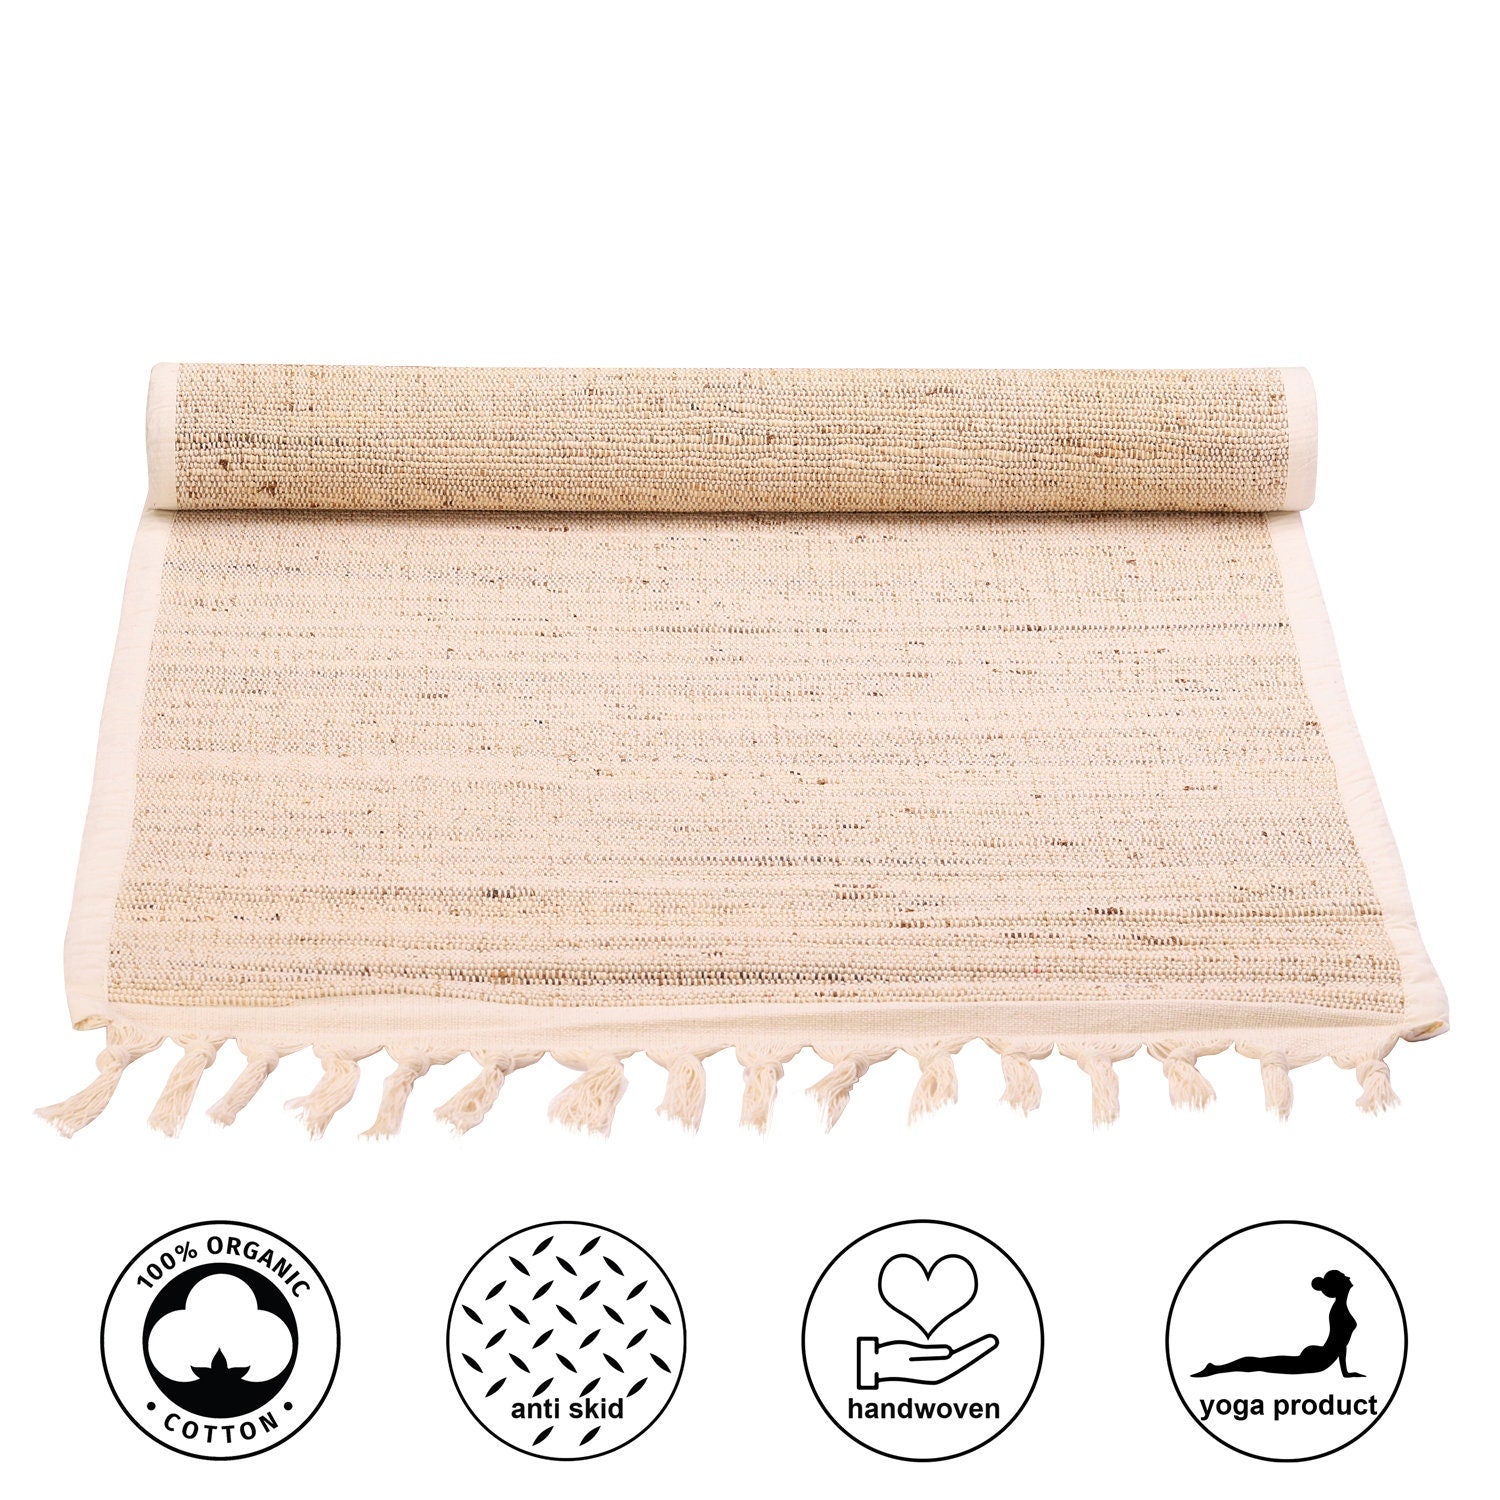 Buy FirstFit Braided Cotton Yoga Mat, Workout Exercise Mat, Non